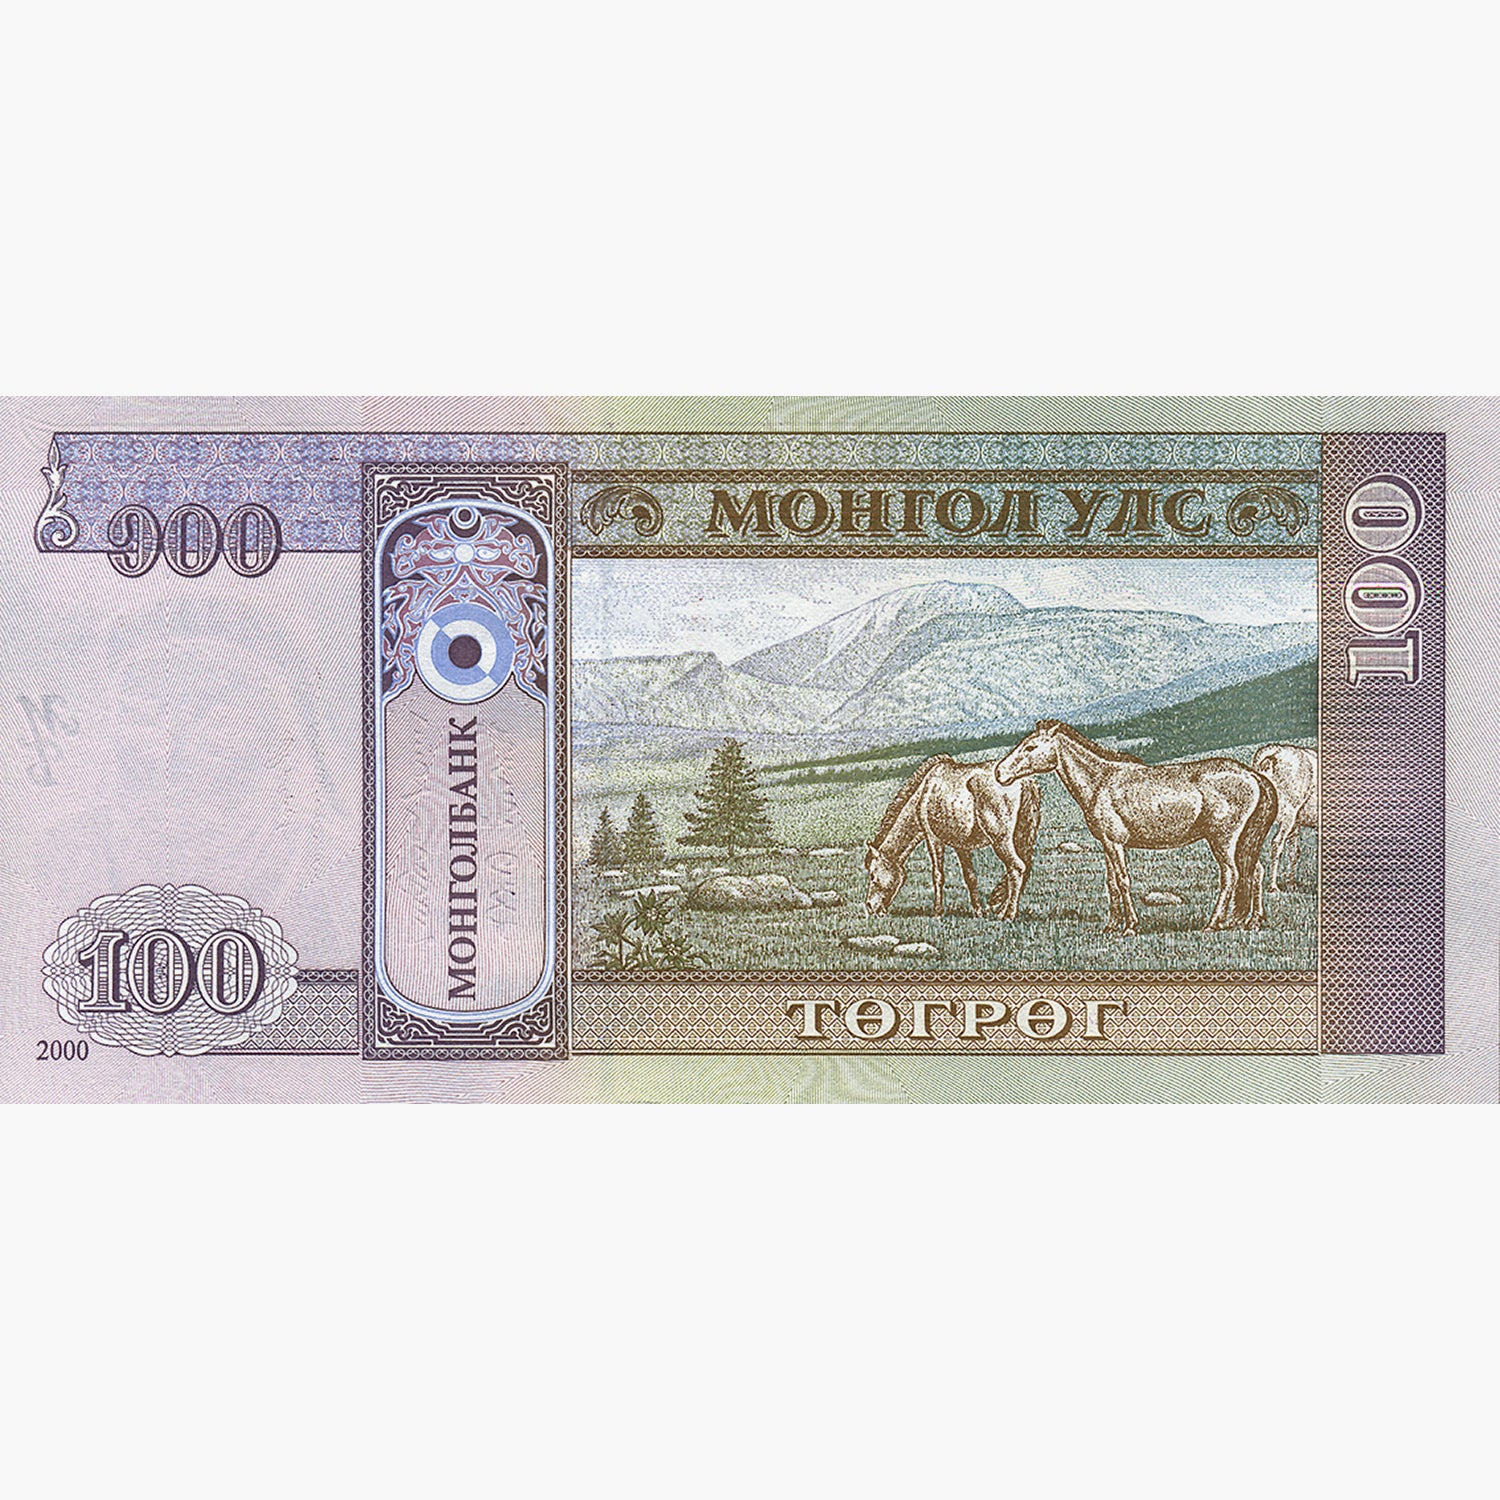 Banknote Collection "Horses"